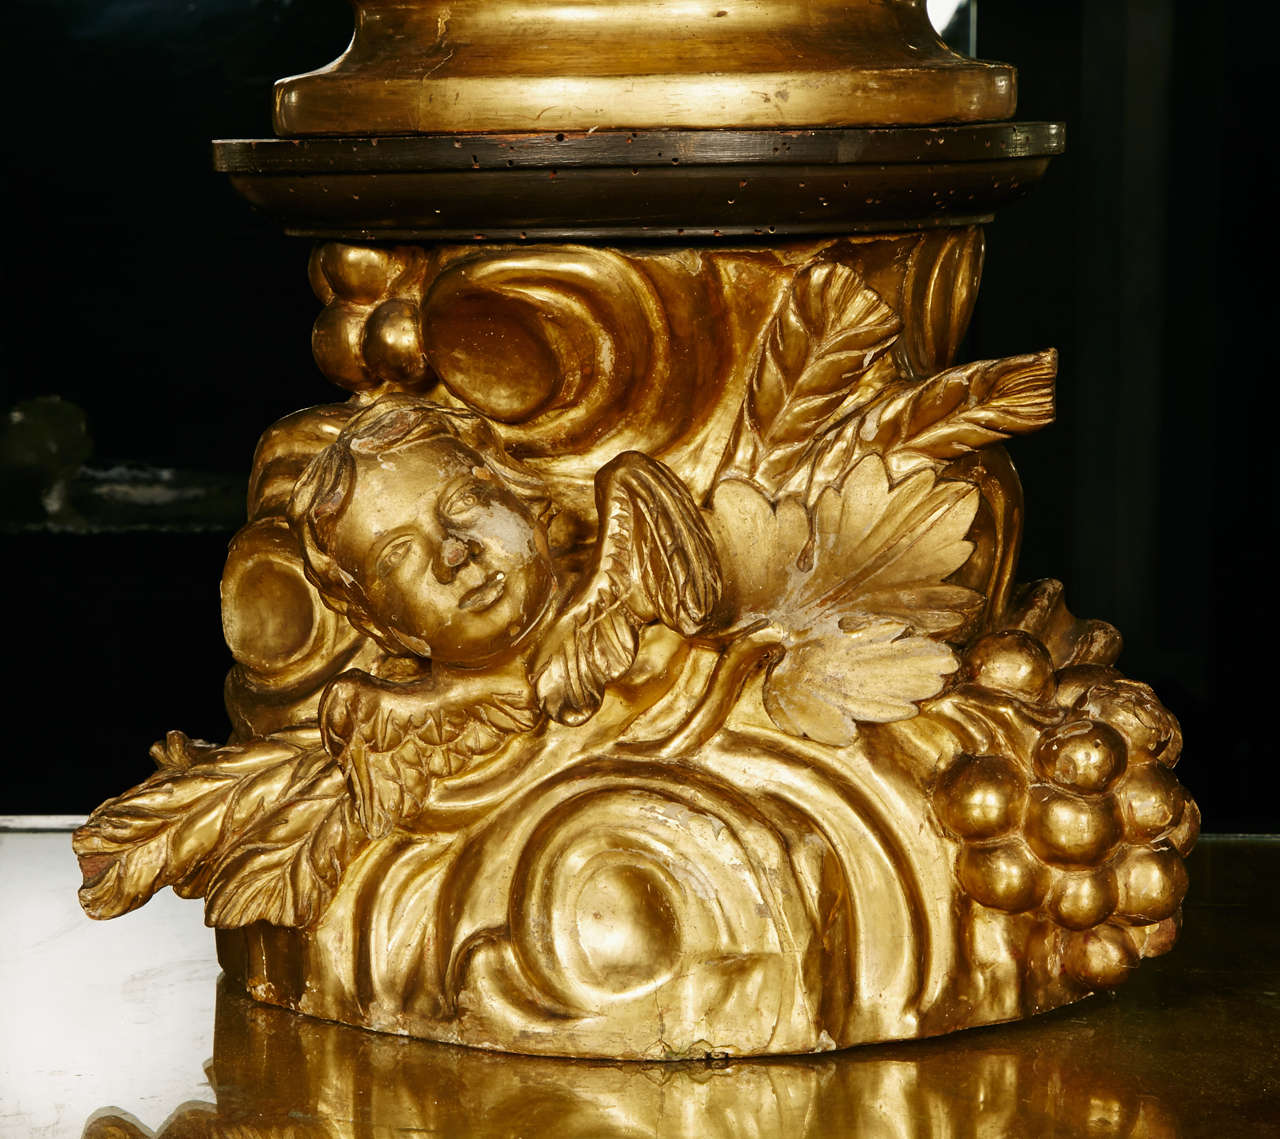 Giltwood sculpture, beginning of 18th century, representing a mythological figure of man carrying a shell, Poseidon or Neptune? von a base with angels.